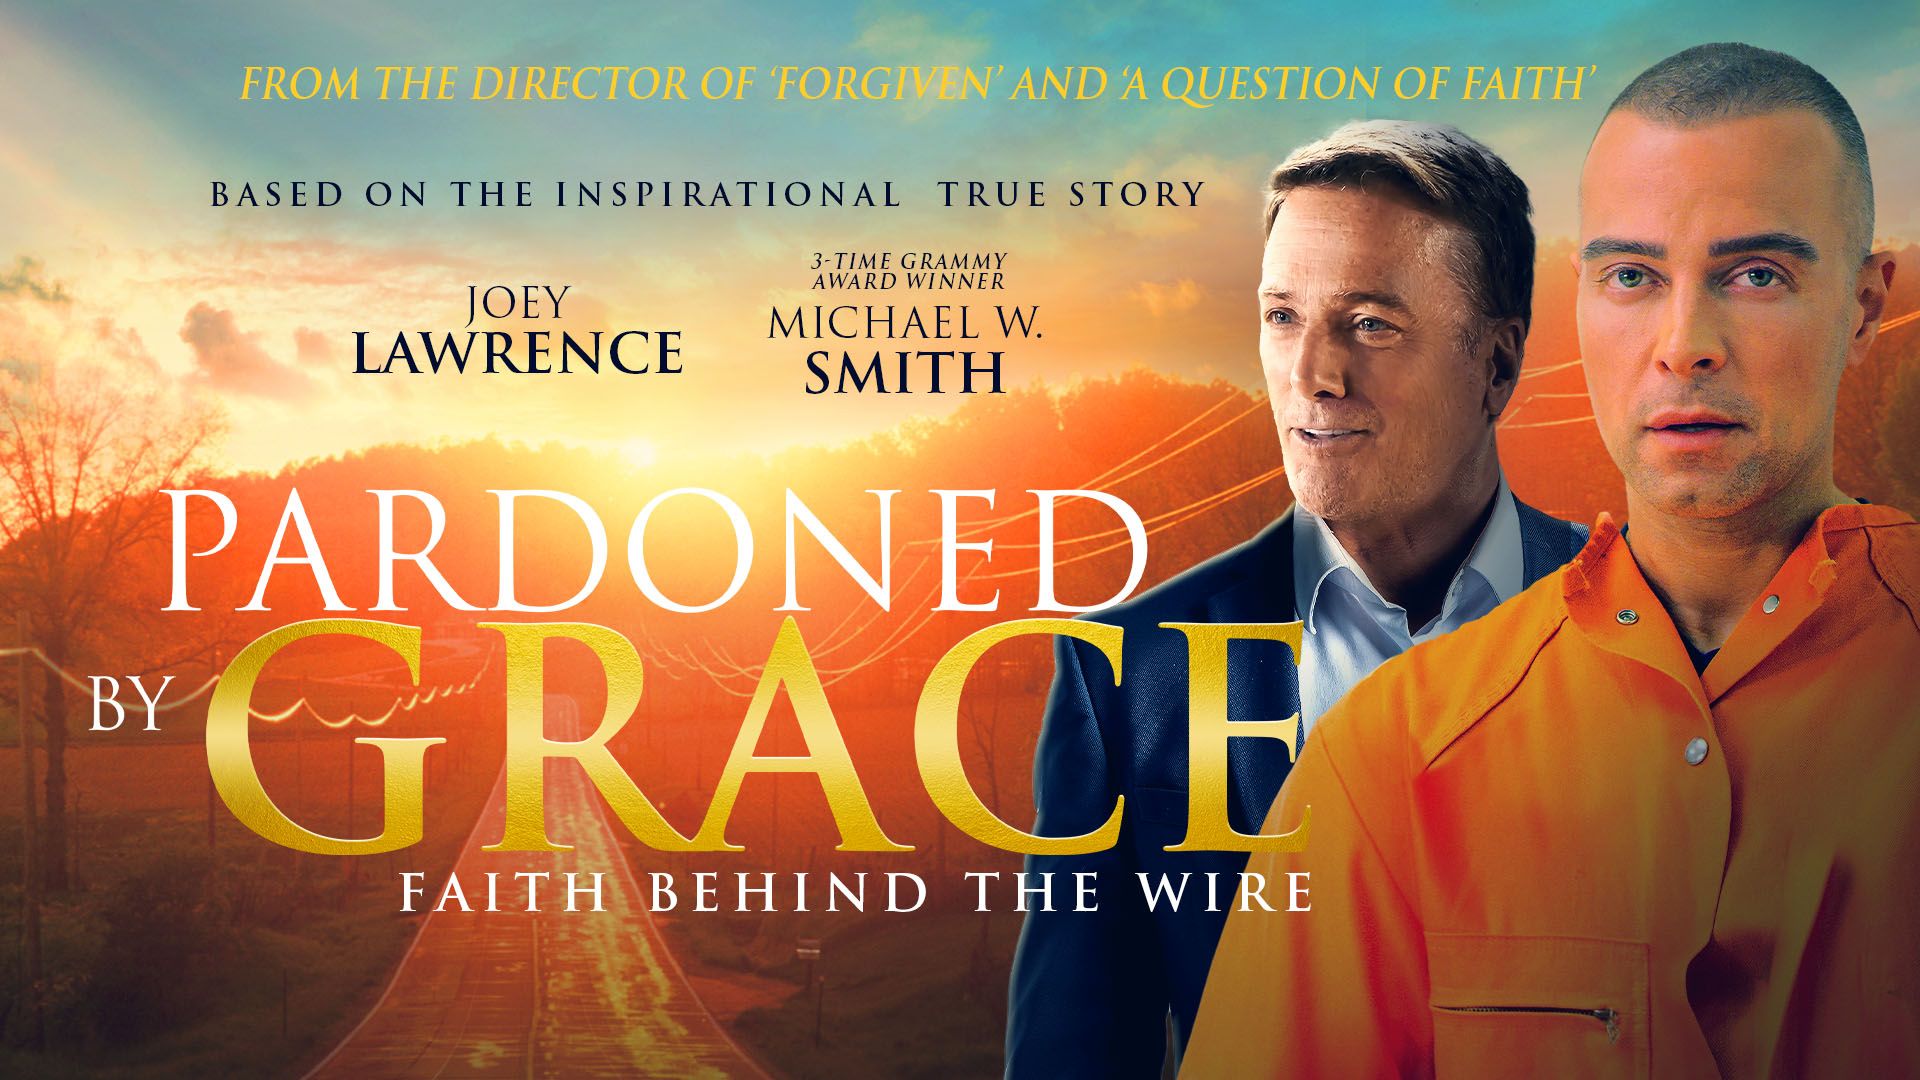 Keyart for the movie Pardoned by Grace